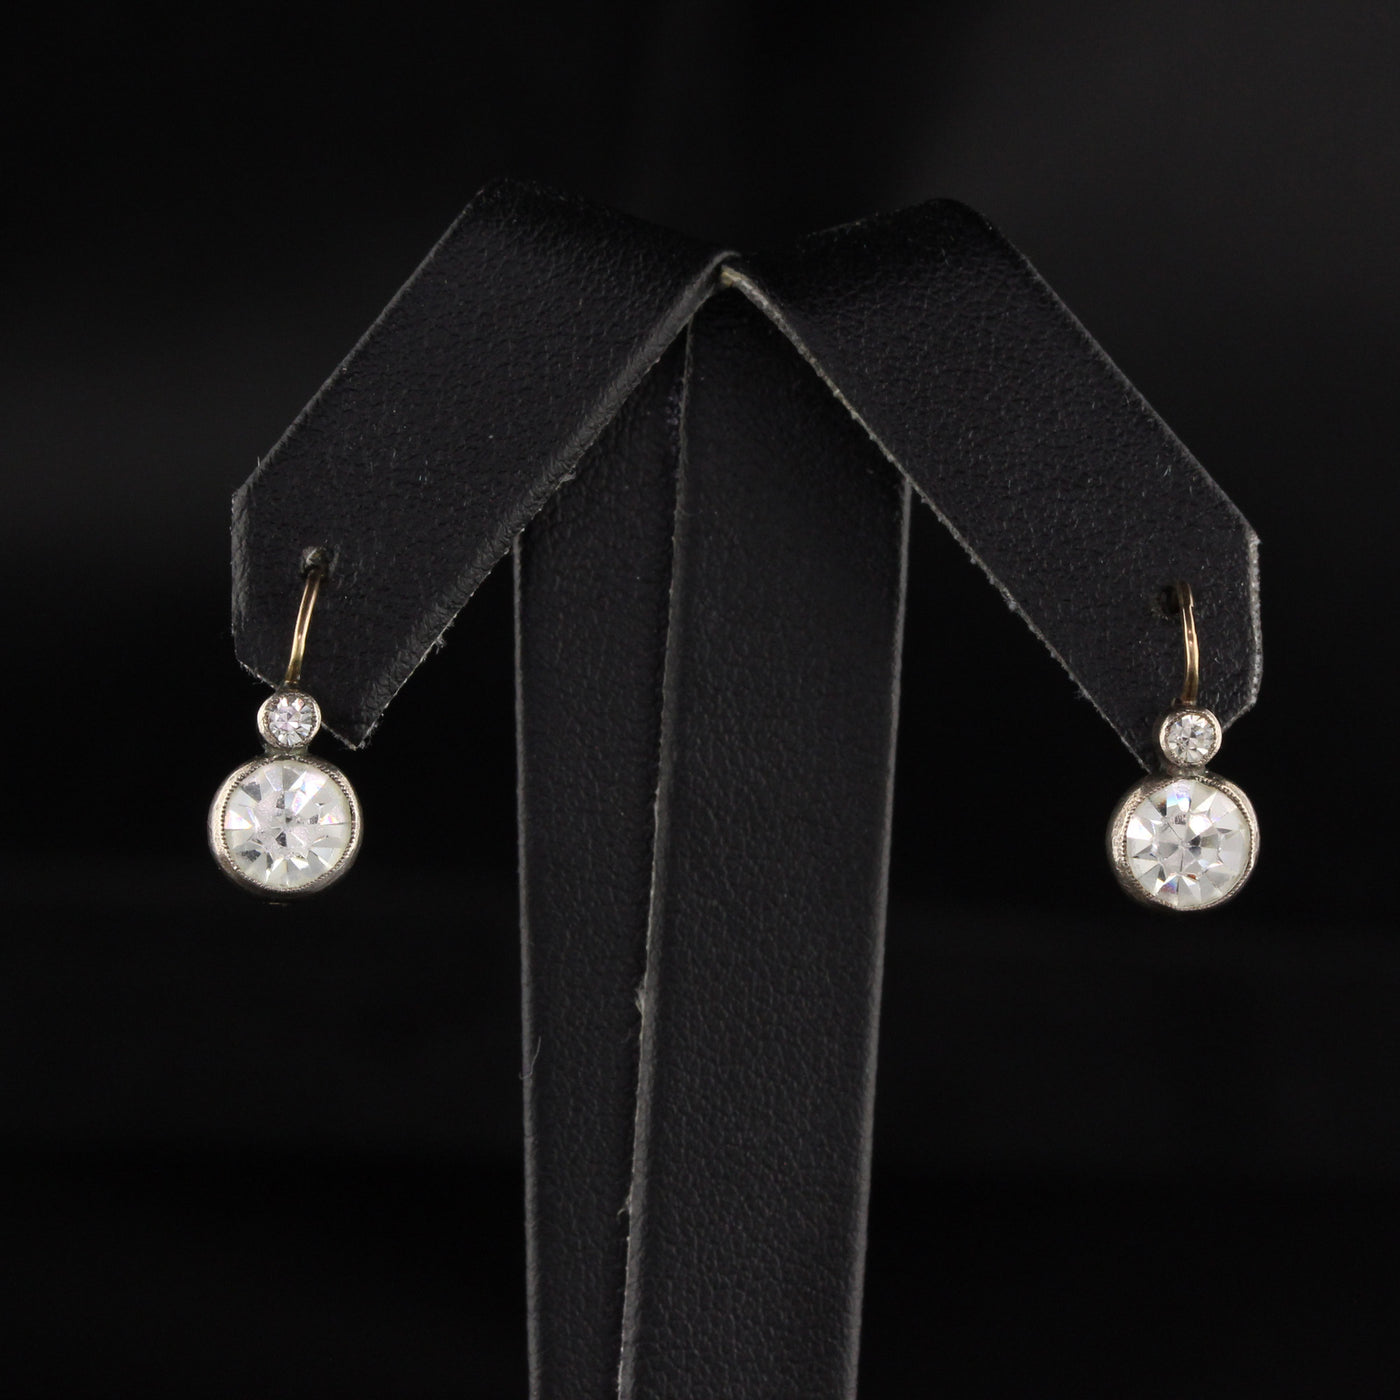 Antique Georgian 18K Yellow Gold and Silver Paste Drop Earrings